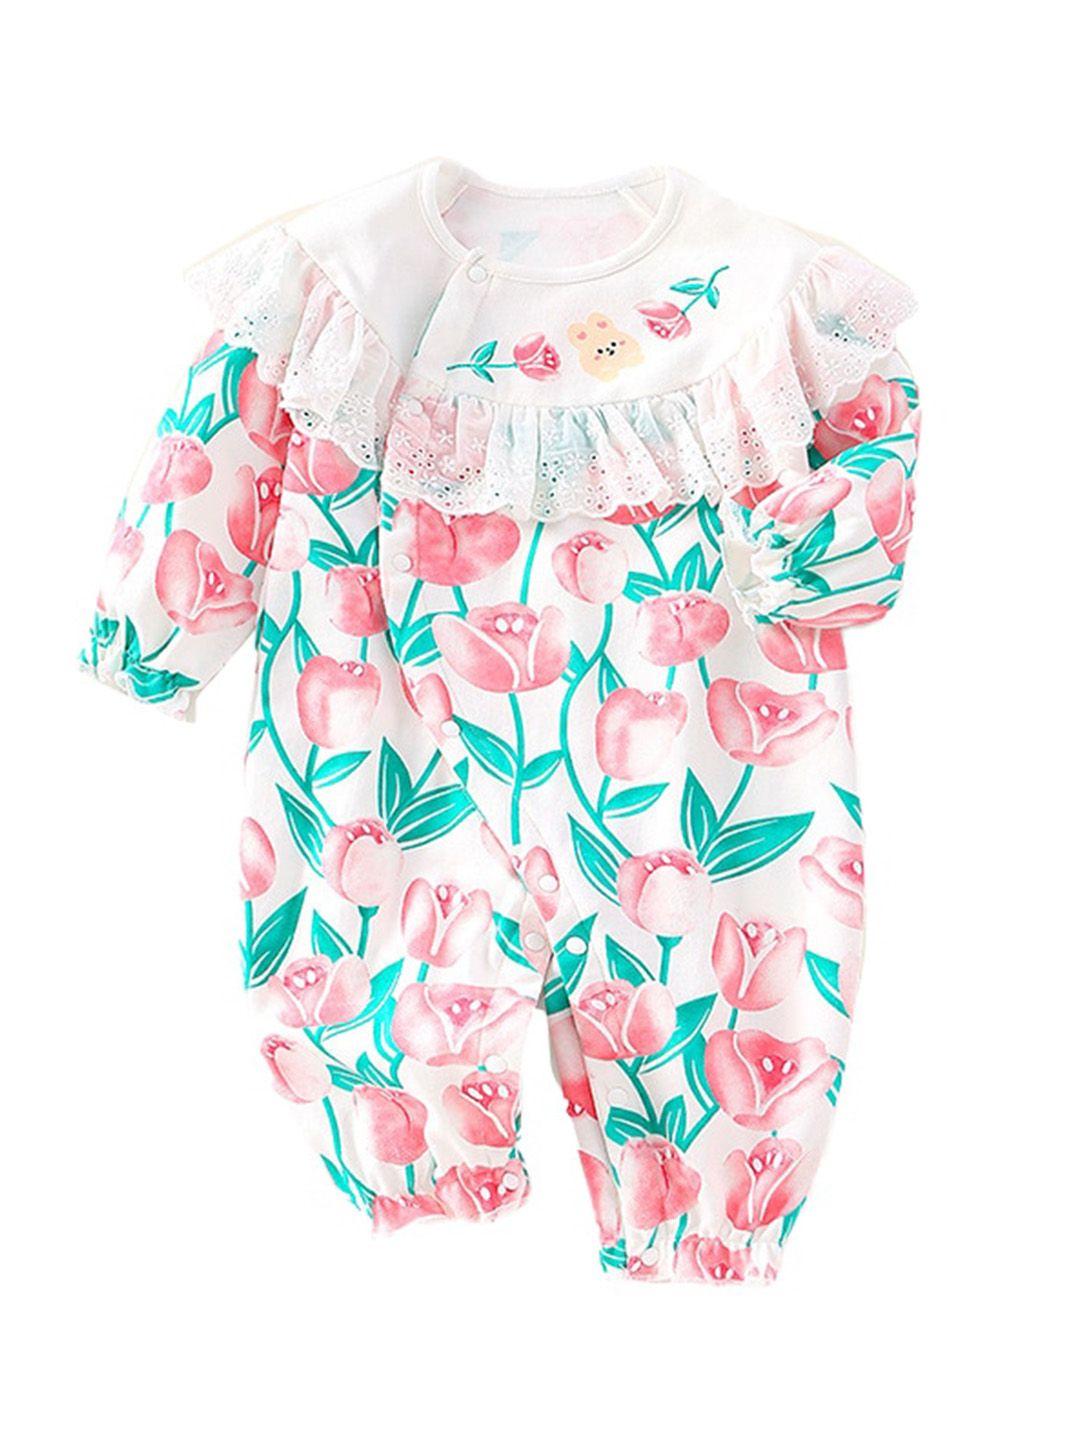 stylecast infant girls printed cotton rompers